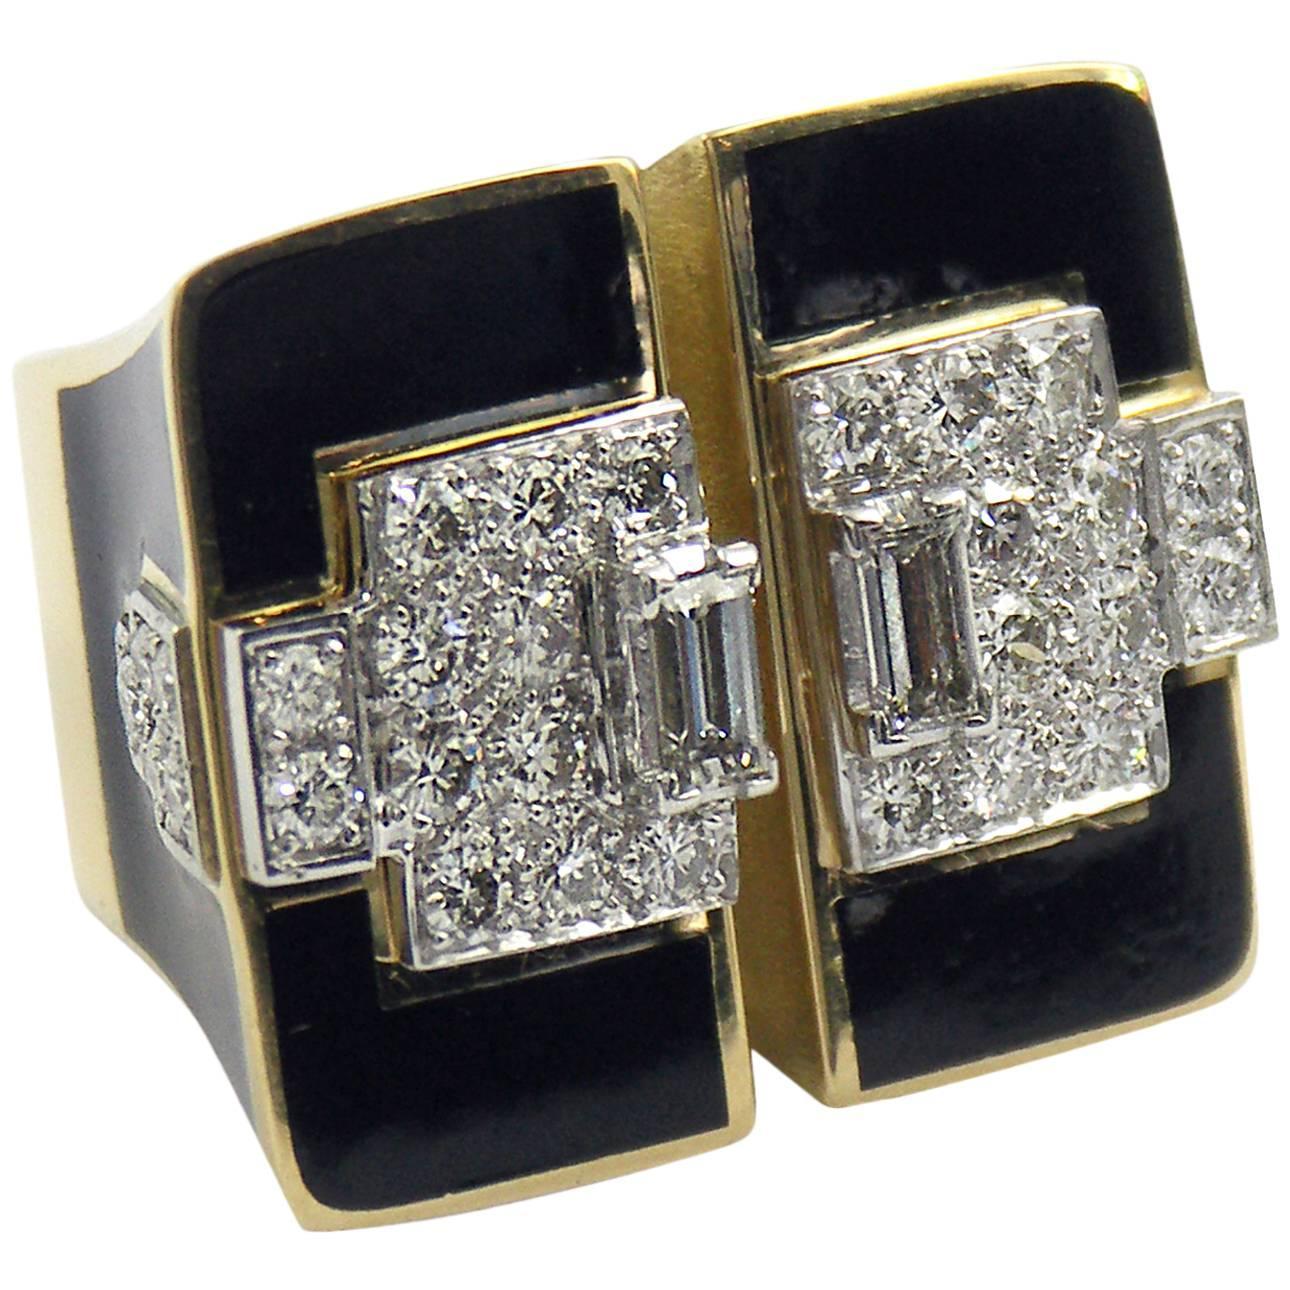 Large Art Deco Inspired Ring with Black Enamel and Diamonds at 1stdibs